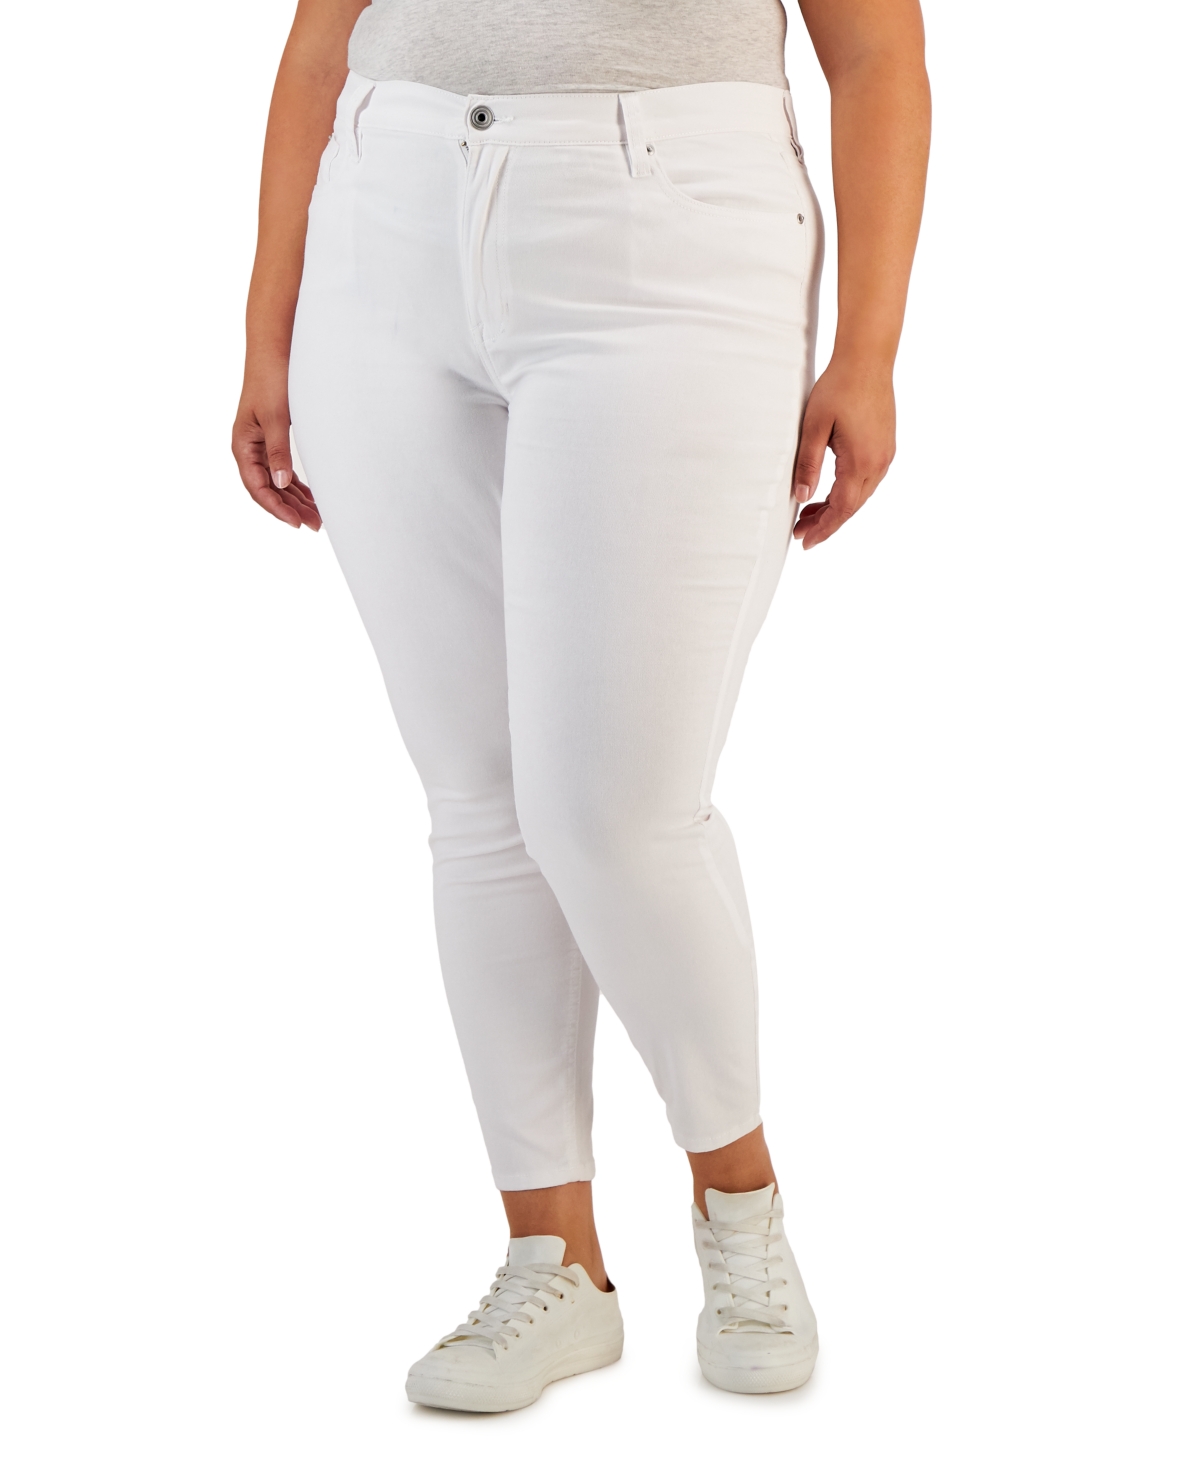 Trendy Plus Size Skinny Ankle Jeans - Optic White